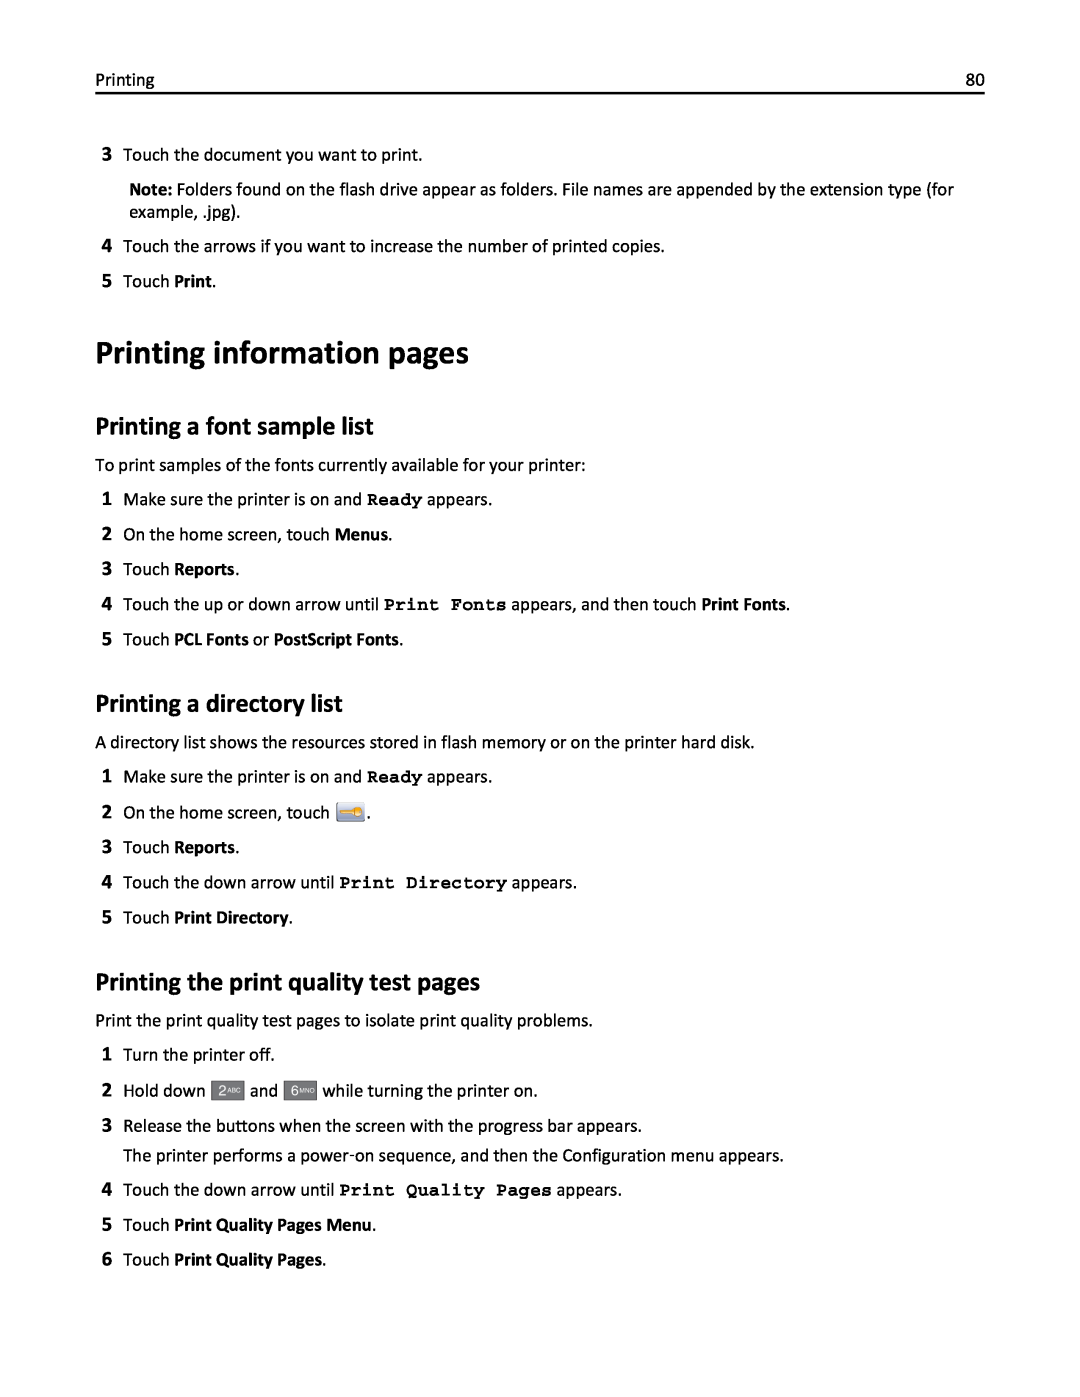 Lexmark 832, 432 Printing information pages, Printing a font sample list, Printing a directory list, Touch Print Directory 